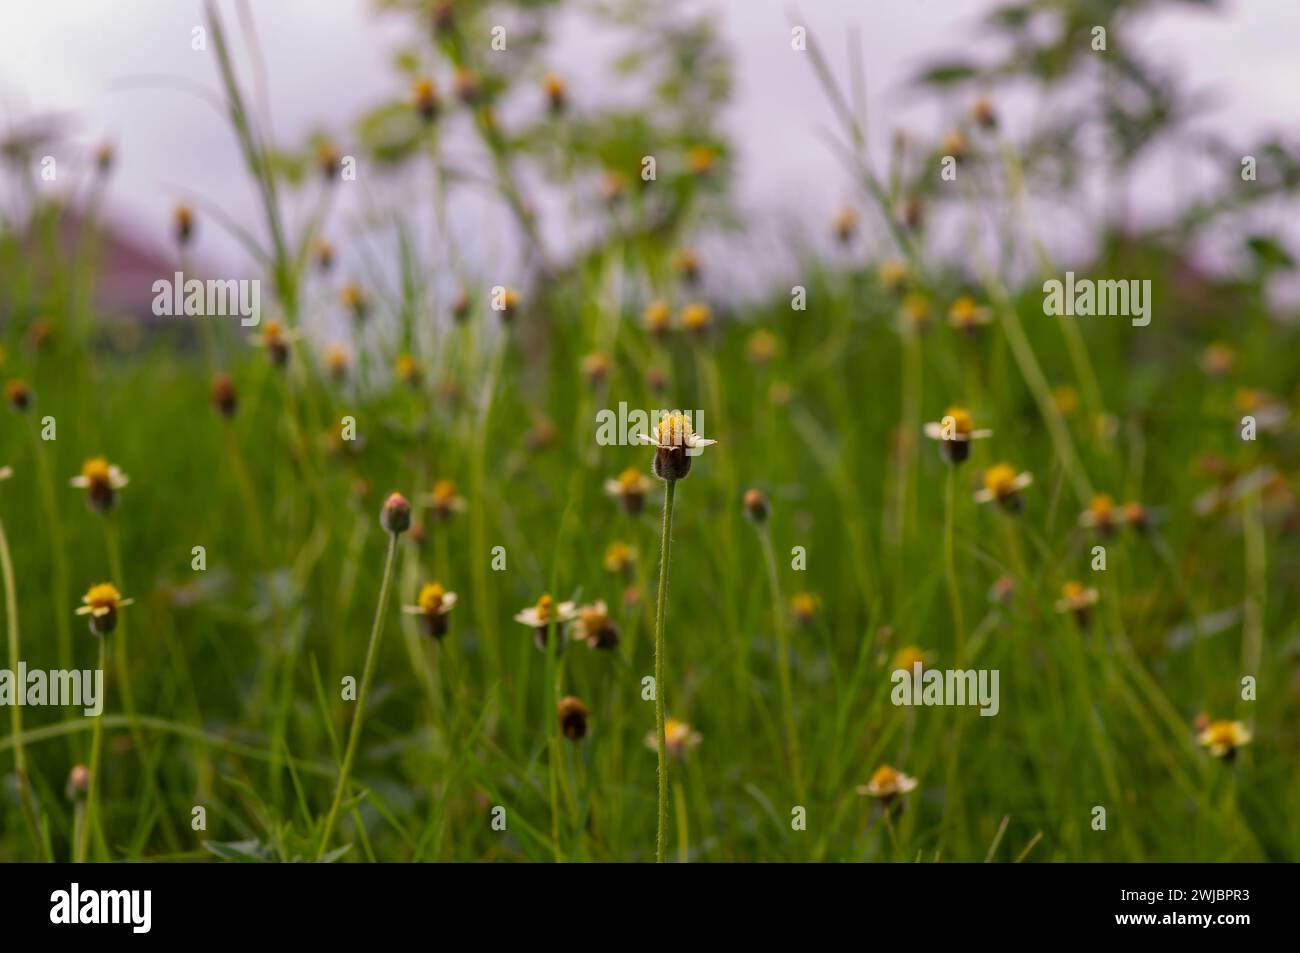 Mexican daisy (Tridax procumbens L.), tiny yellow flowers in the meadow, selected focus. Stock Photo